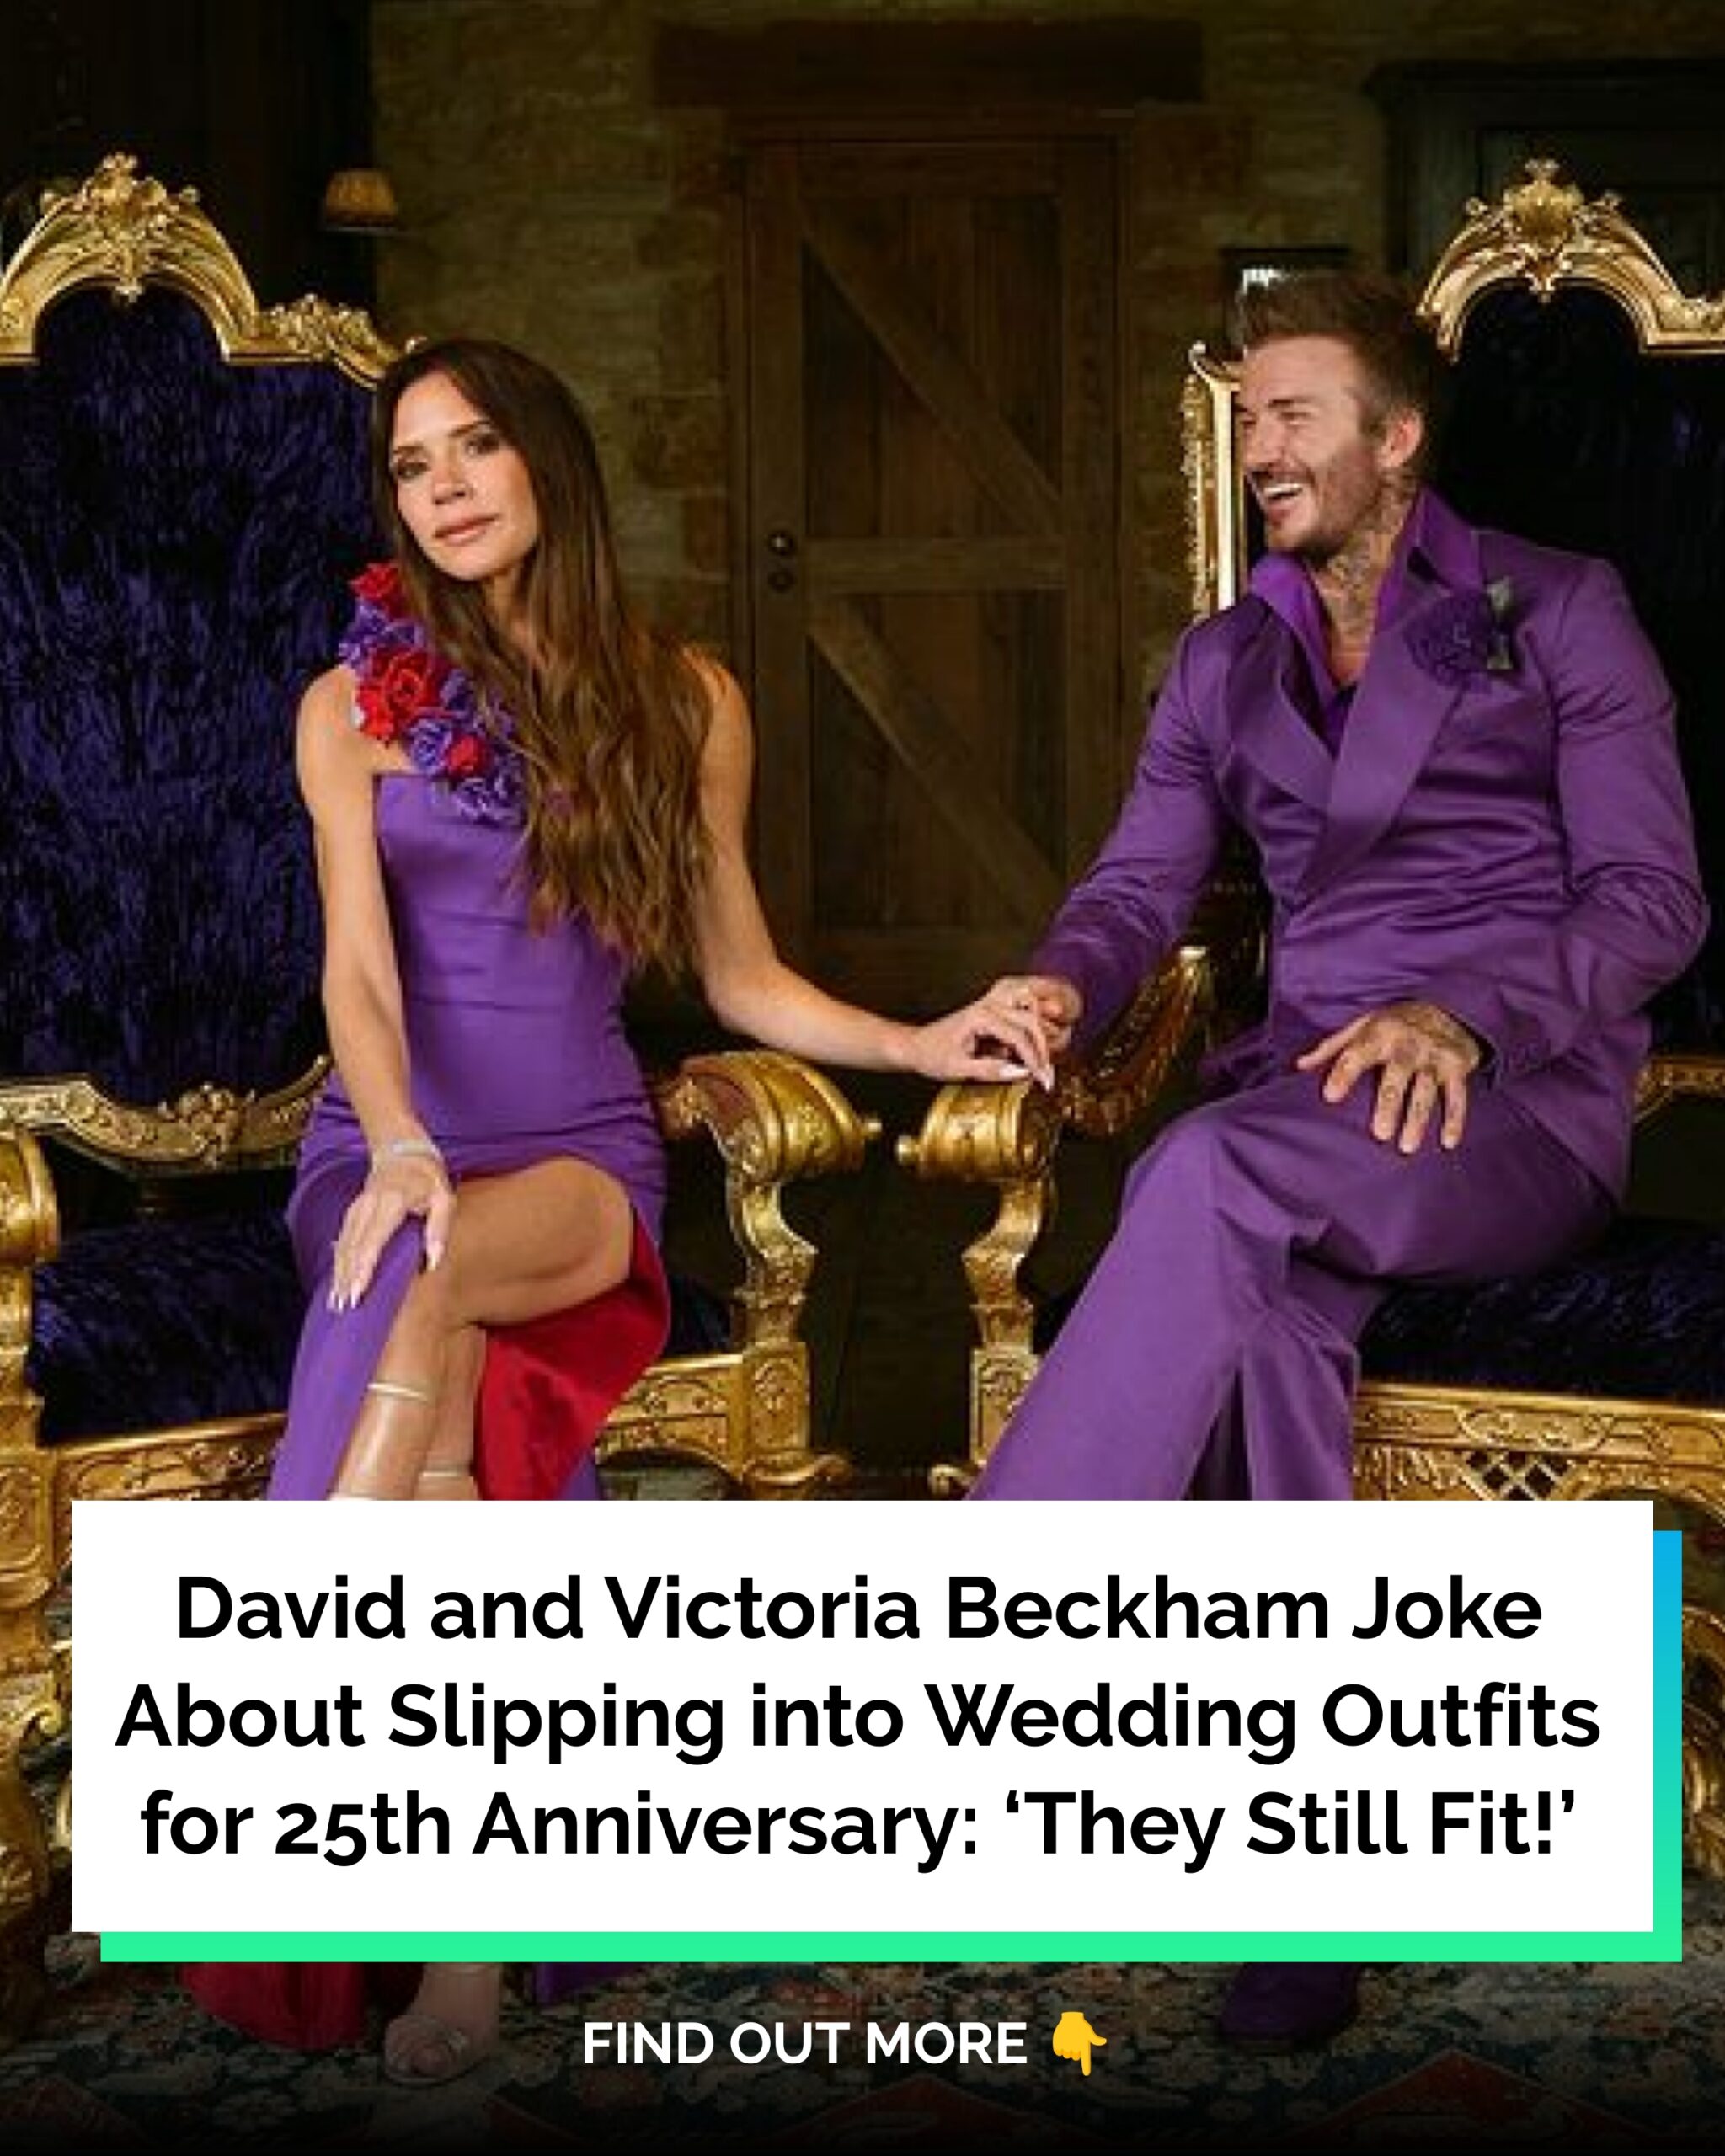 David and Victoria Beckham Joke About Slipping into Wedding Outfits for 25th Anniversary: ‘They Still Fit!’